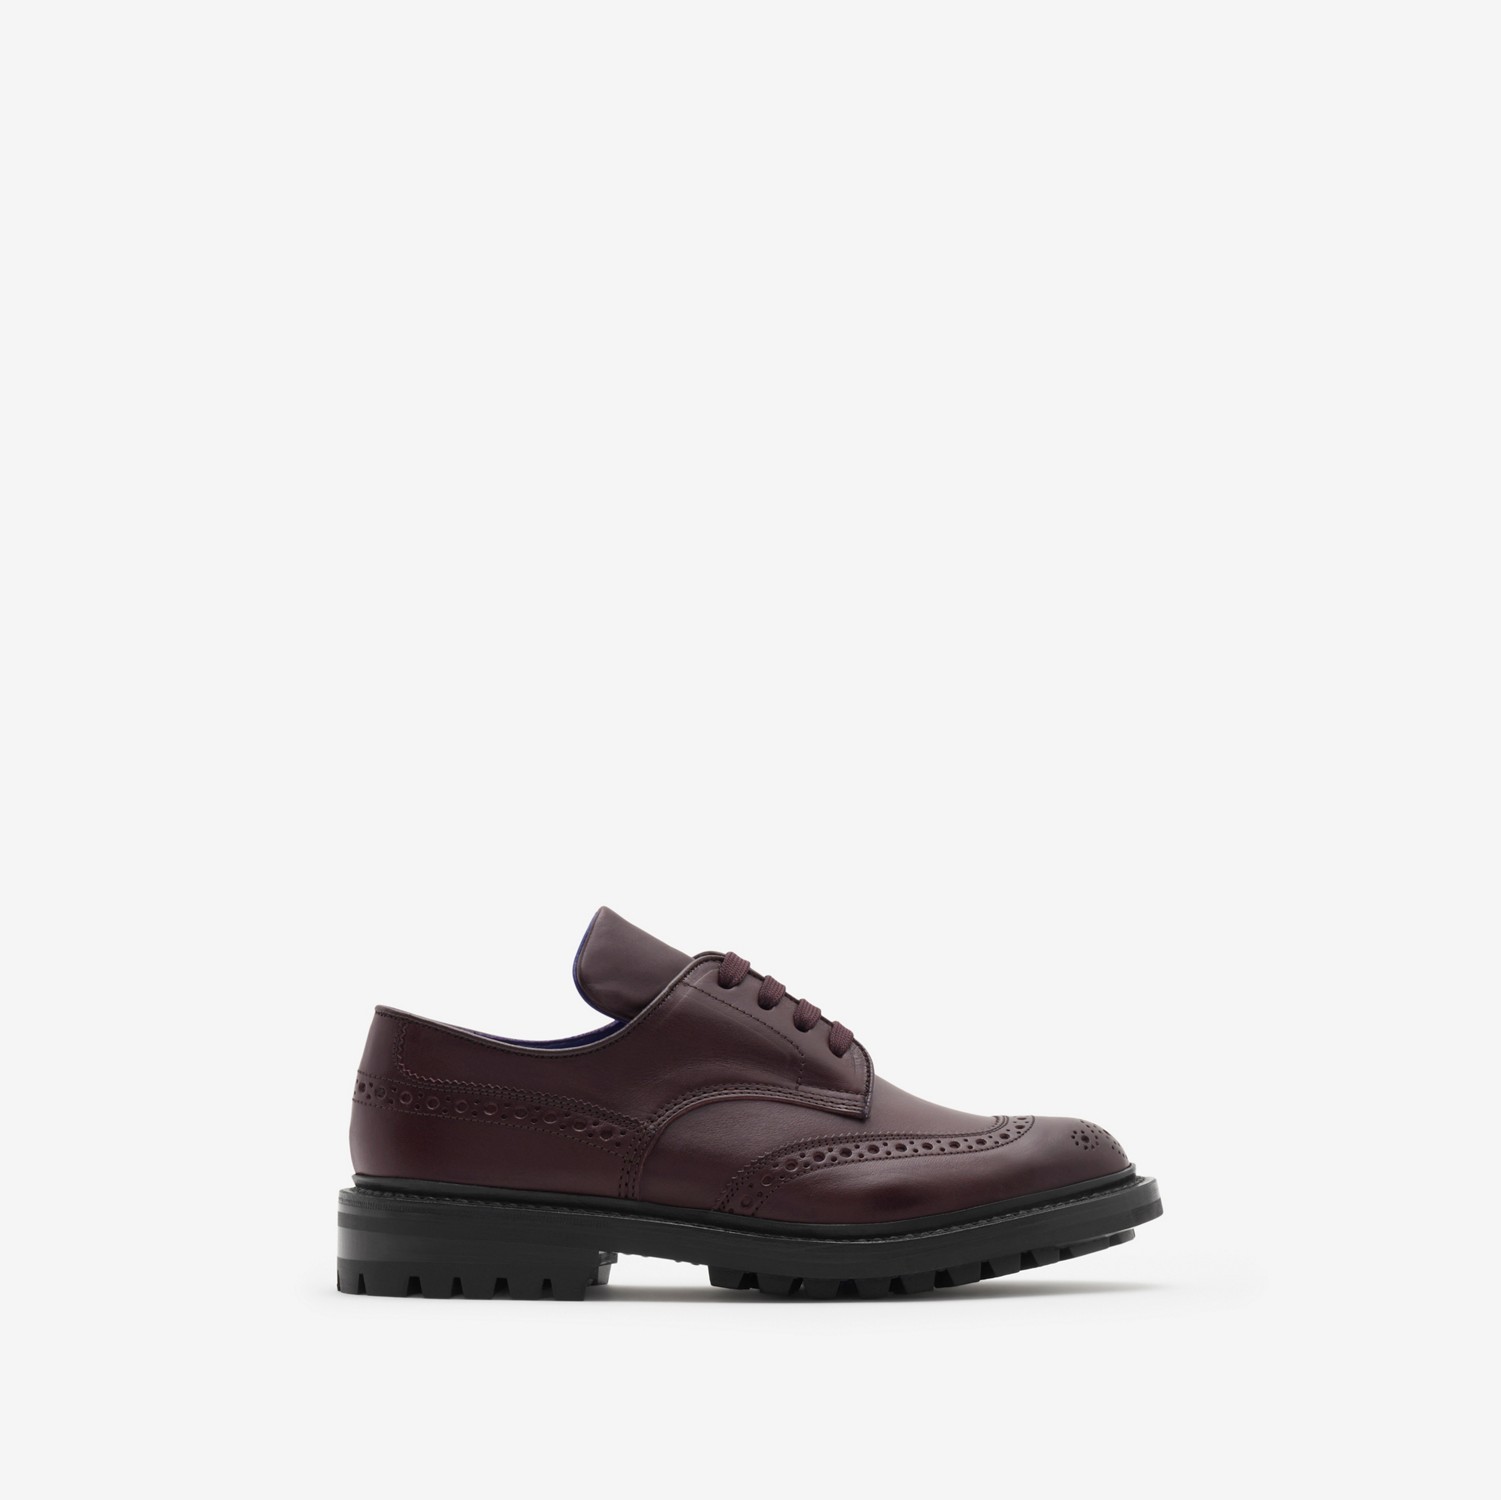 Tricker’s Leather Devon Brogues in Aubergine | Burberry® Official